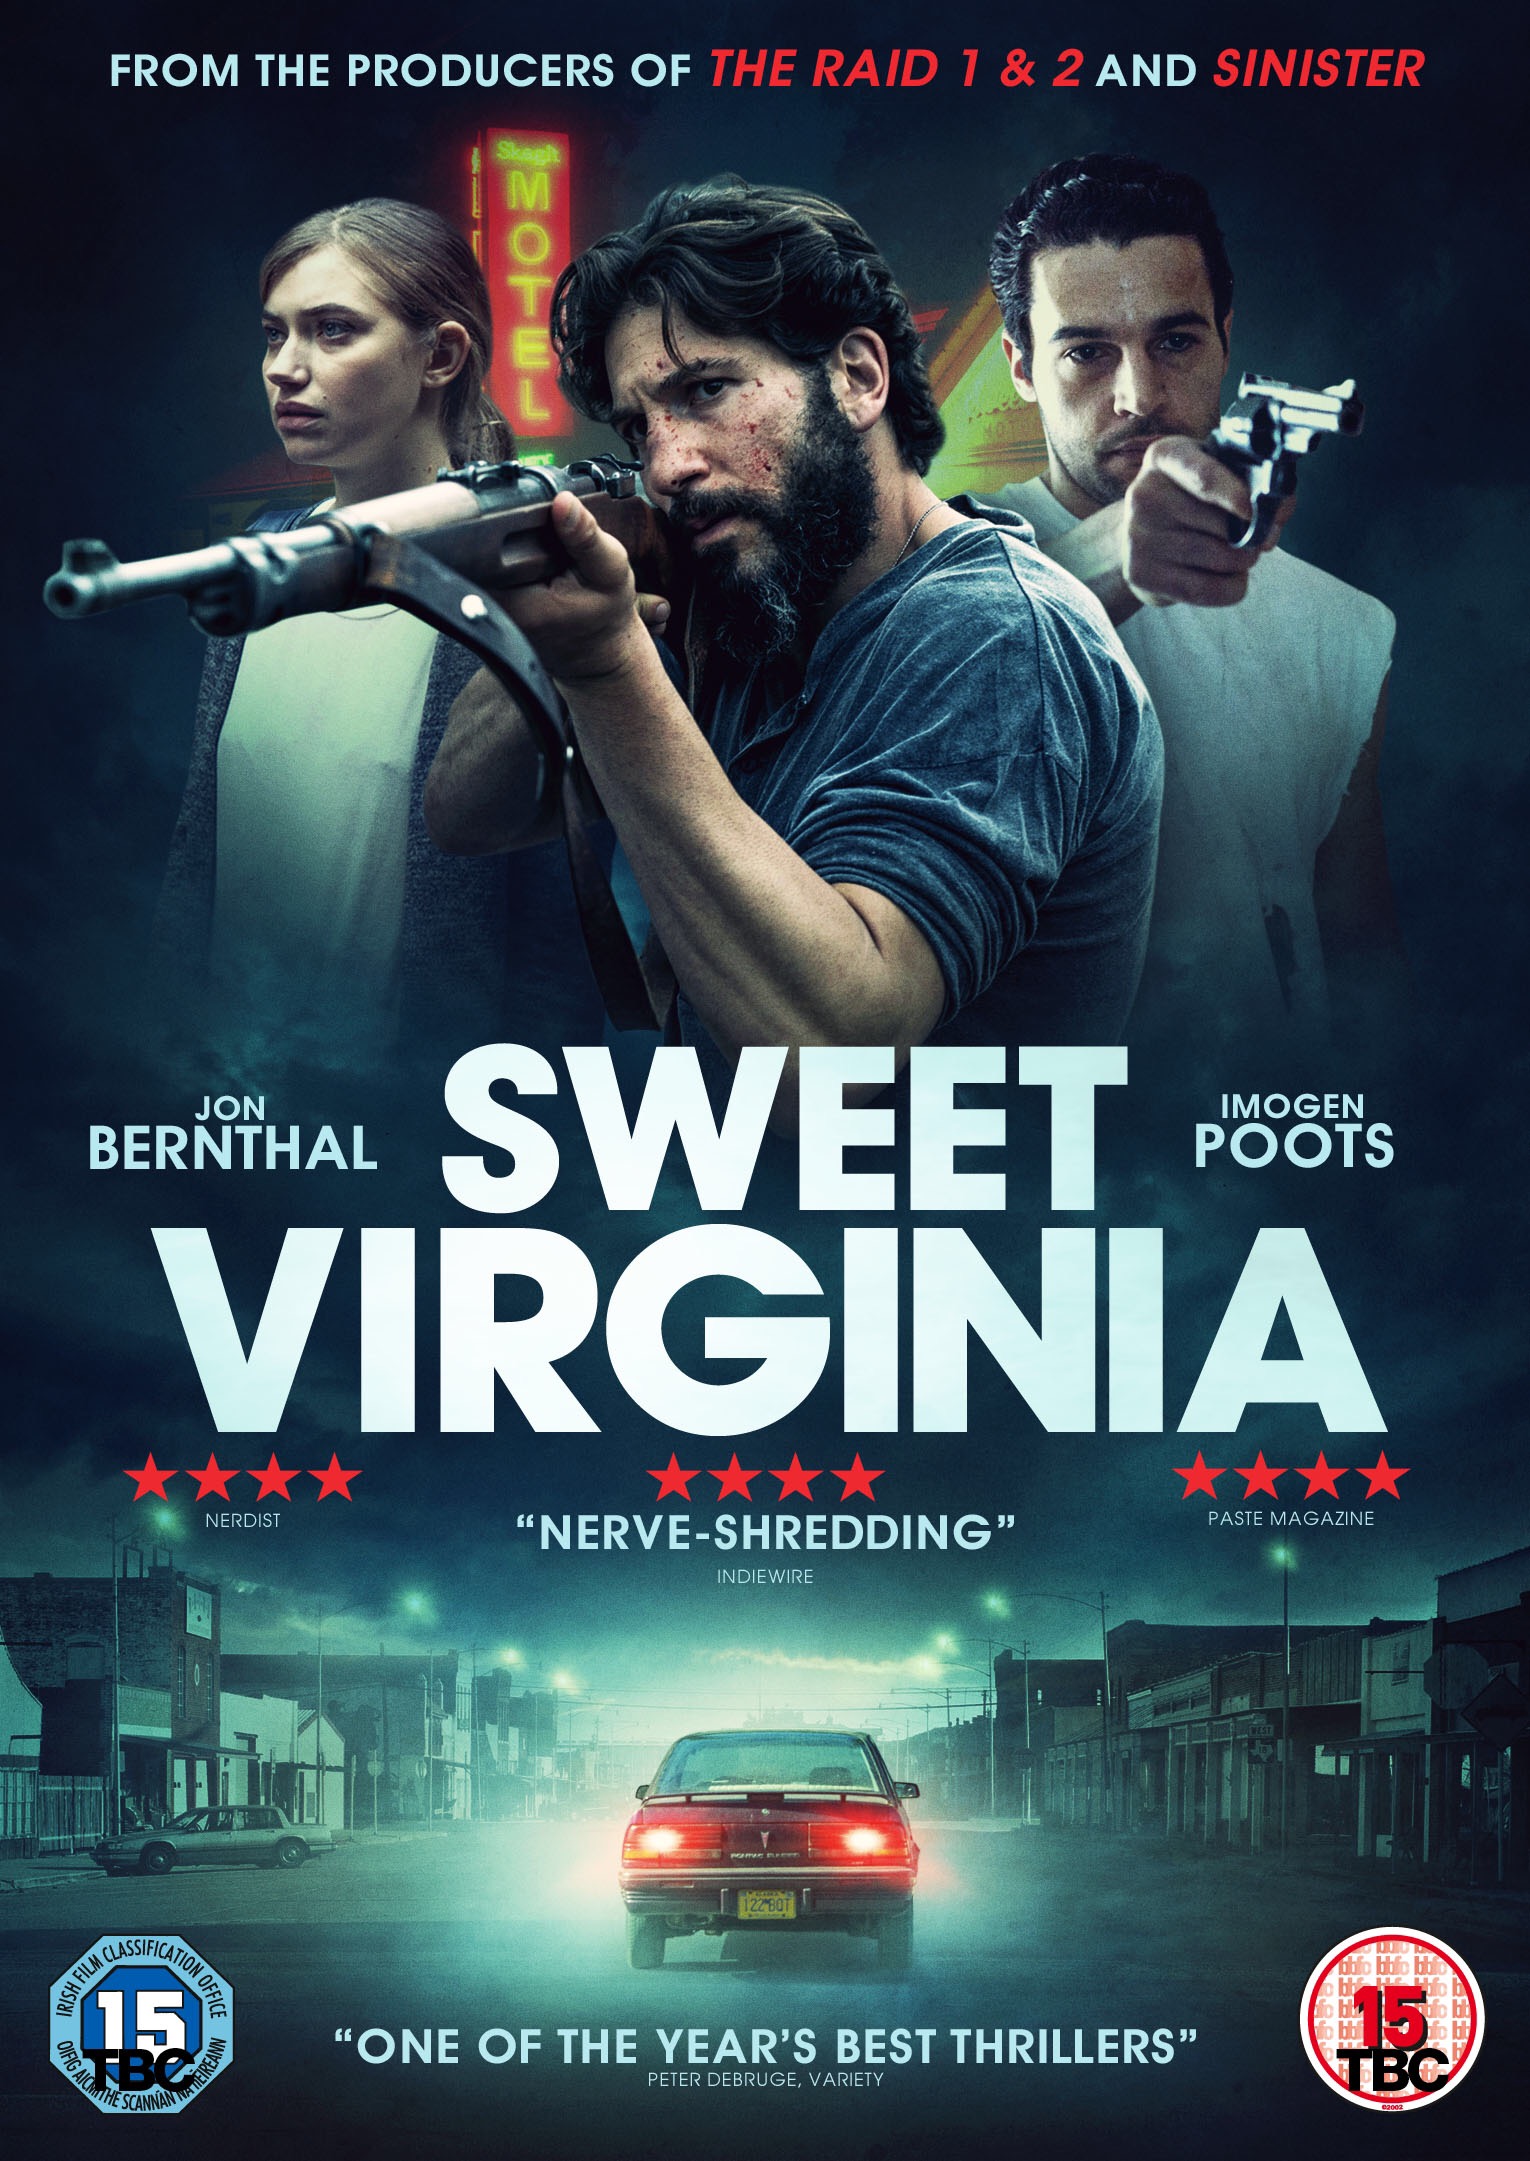 Much anticipated thriller Sweet Virginia gets January DVD release